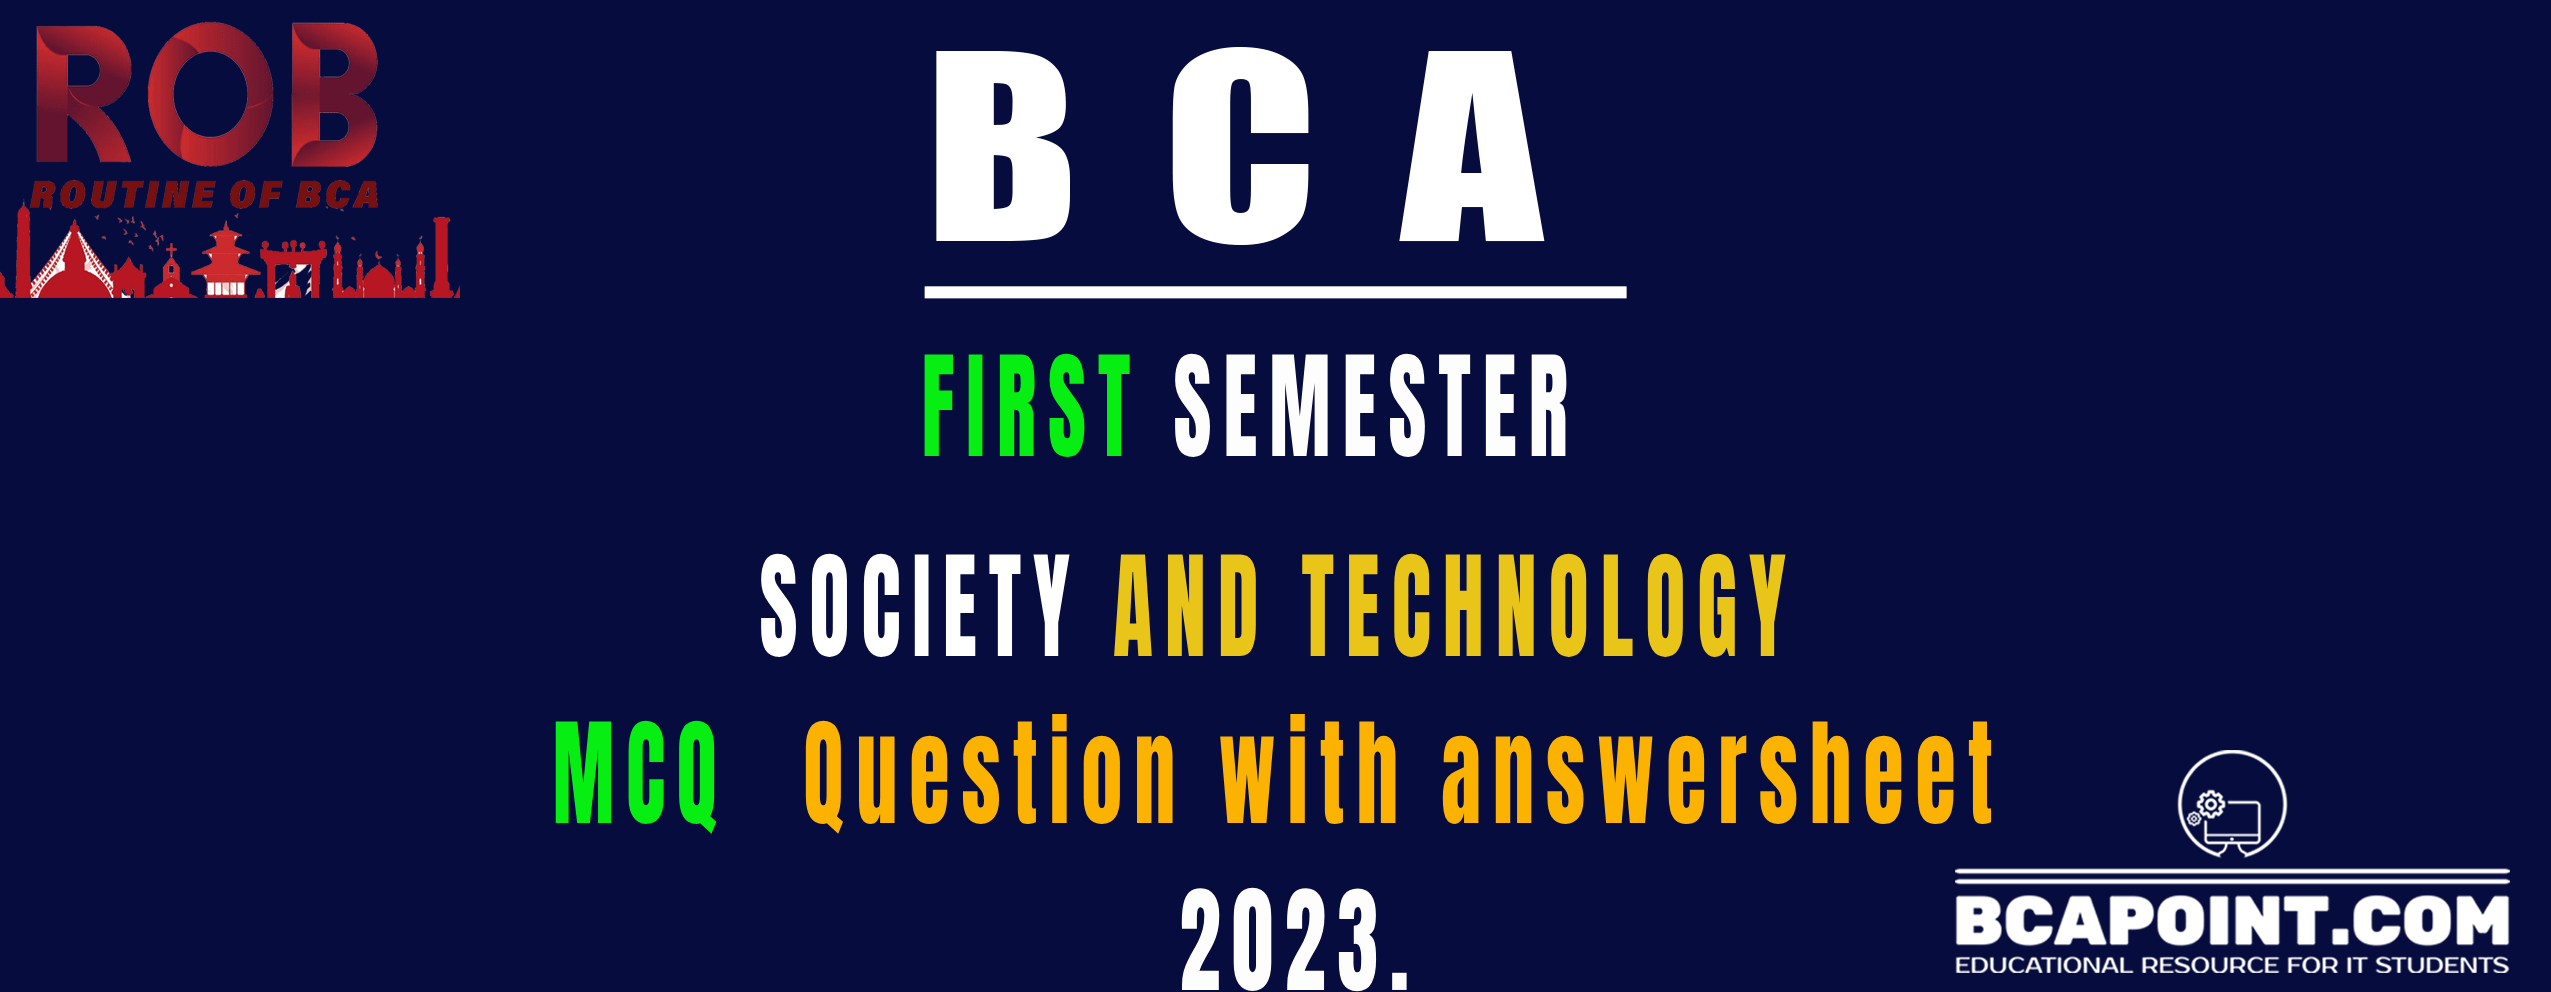 You are currently viewing BCA First Semester Society and Technology MCQ 2022 Batch